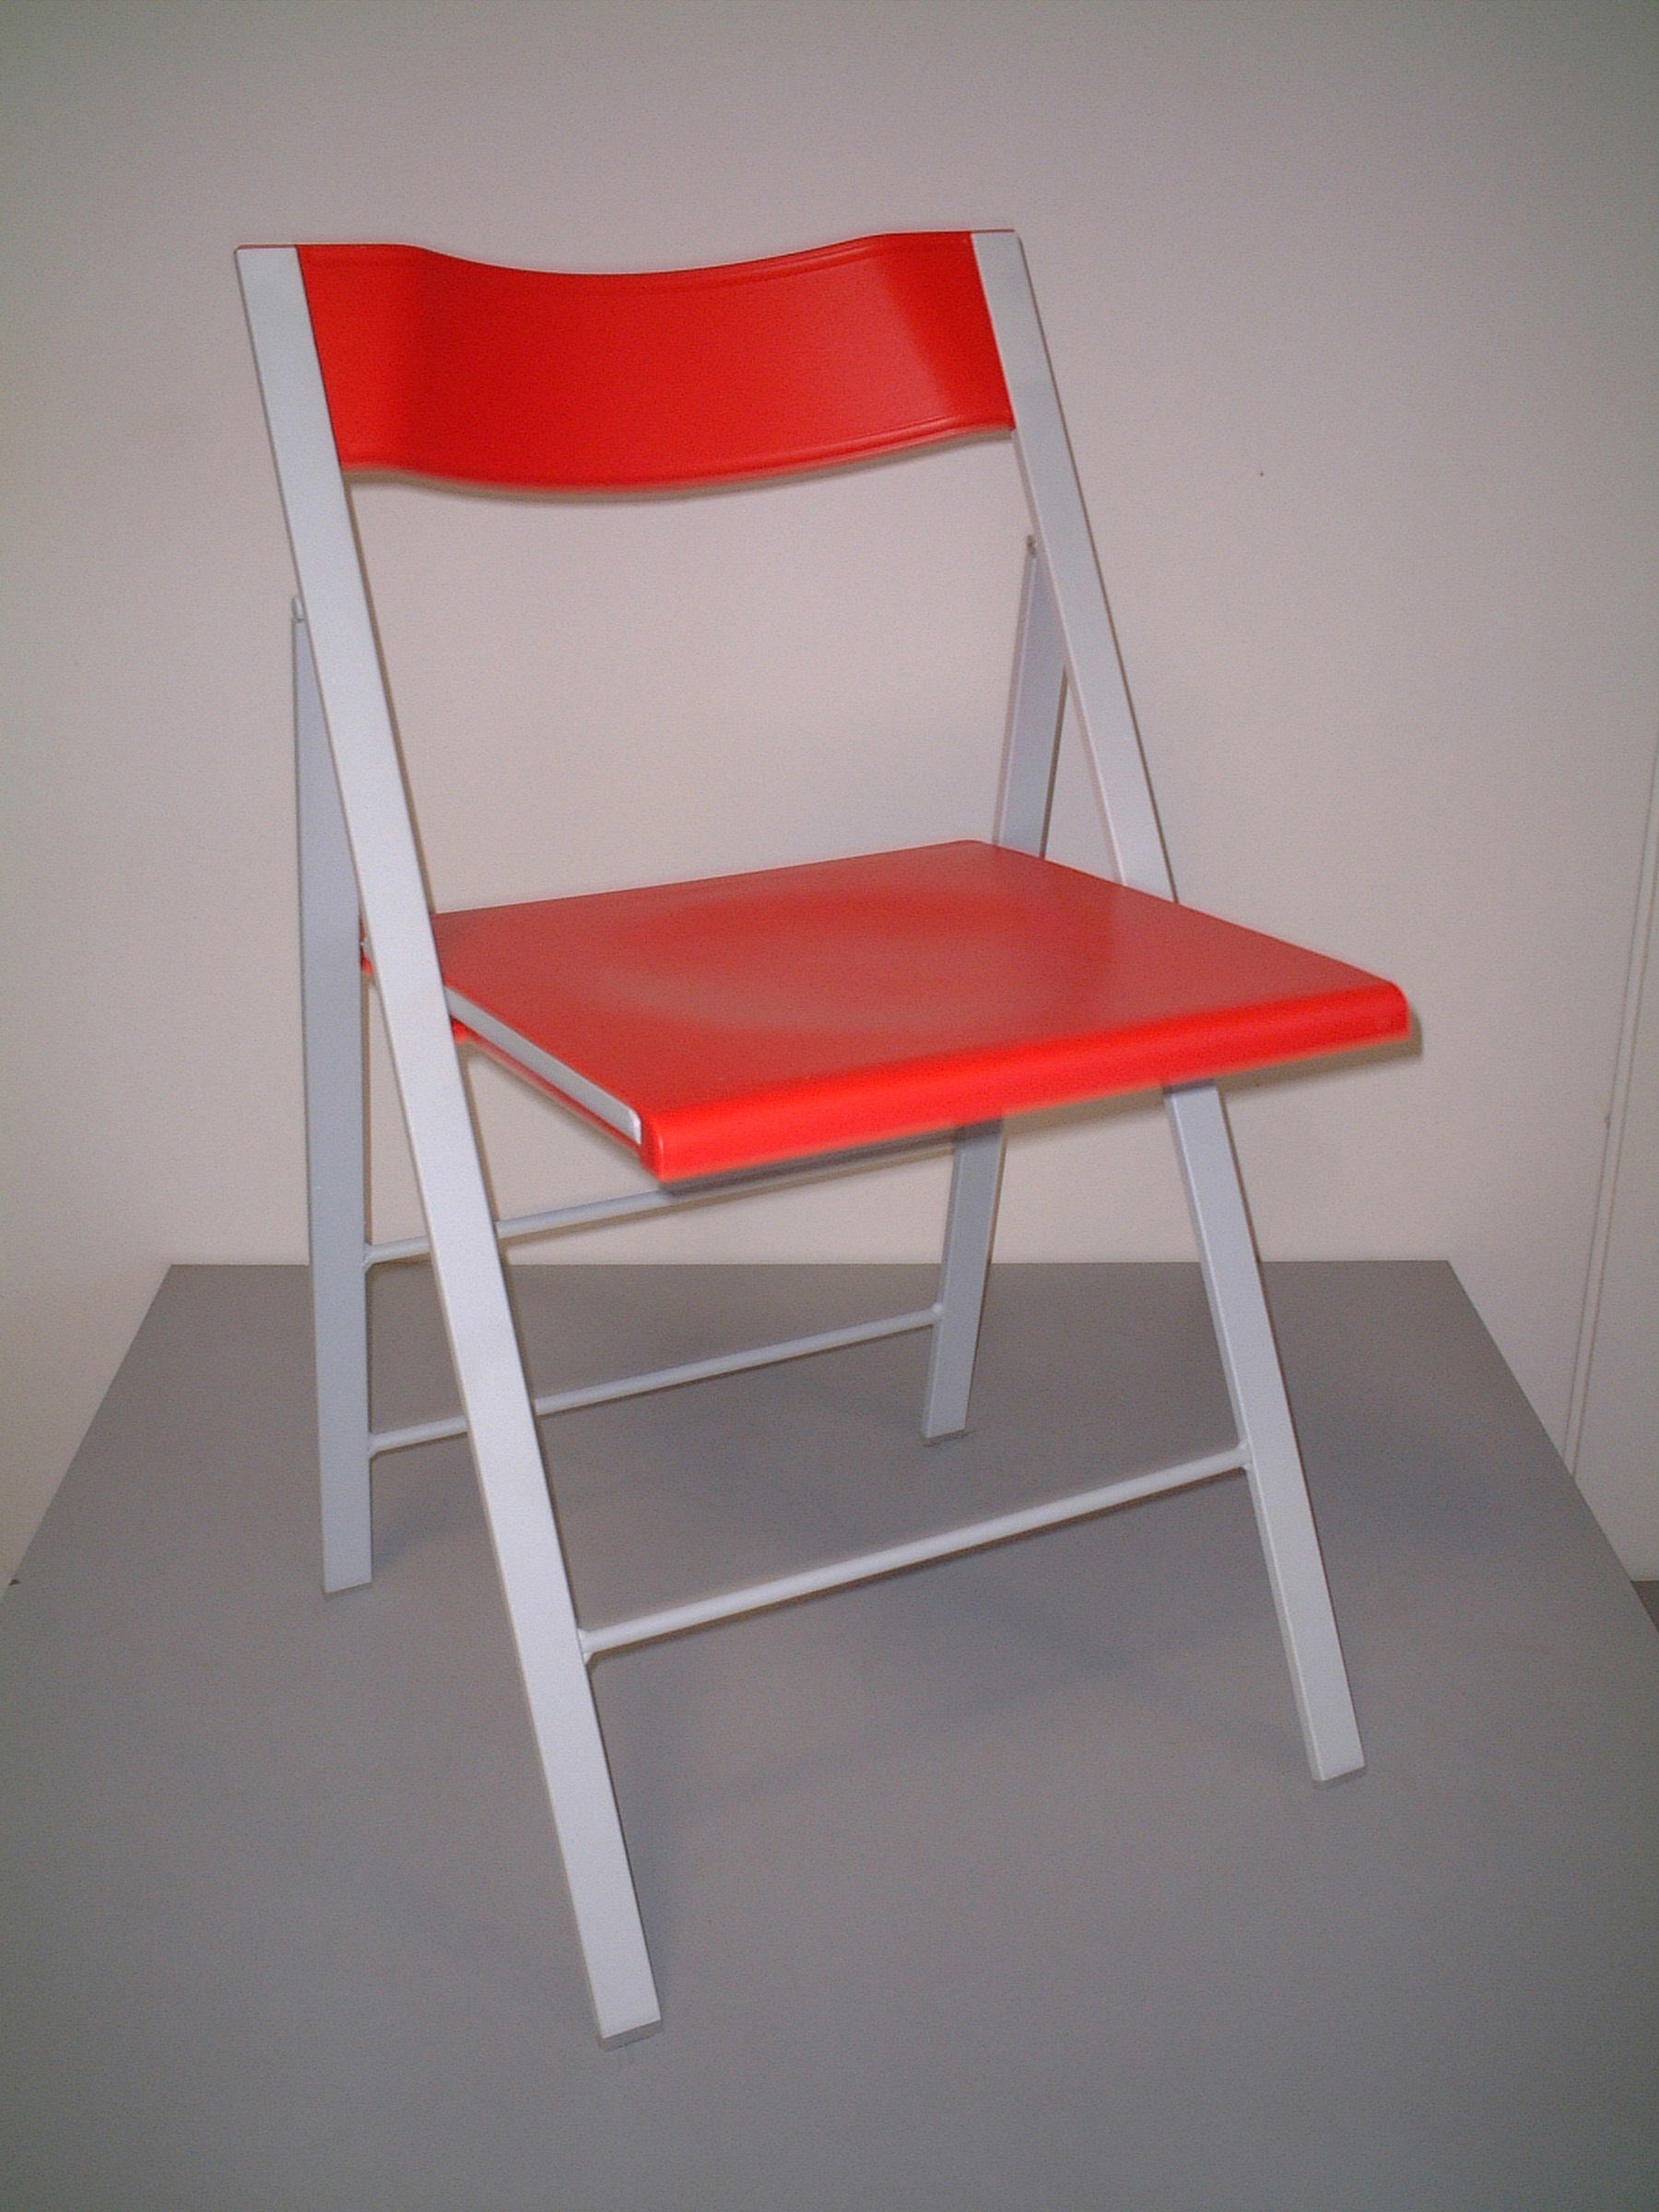 pocket plastic  chairs from arrmet srl  architonic